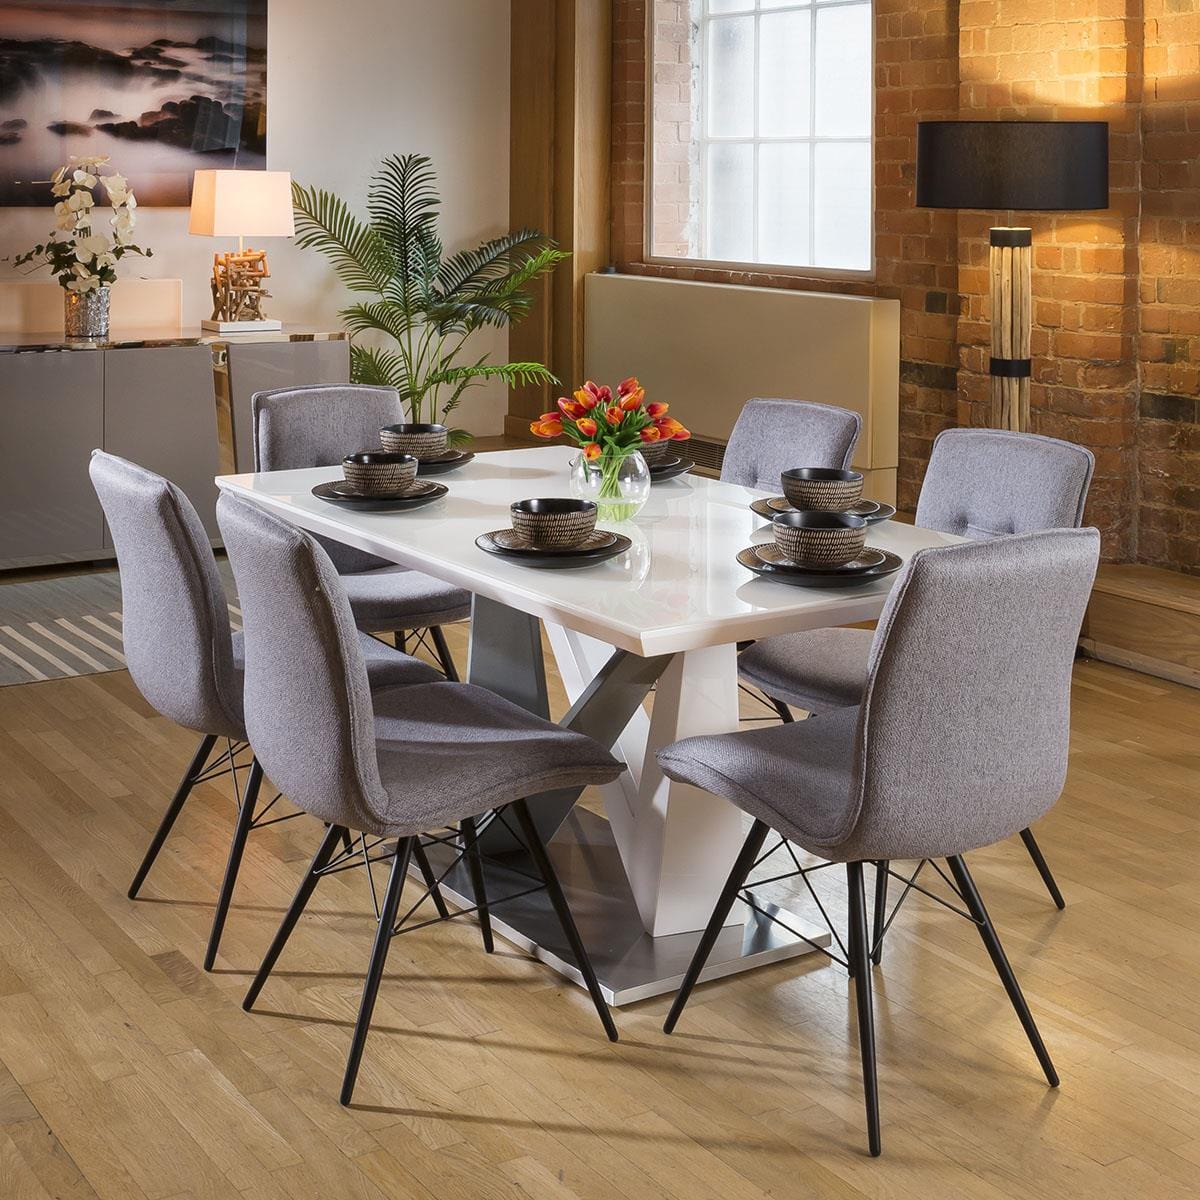 Quatropi Stunning 6 Seater White Dining Set With 6 x Grey Fabric Chairs